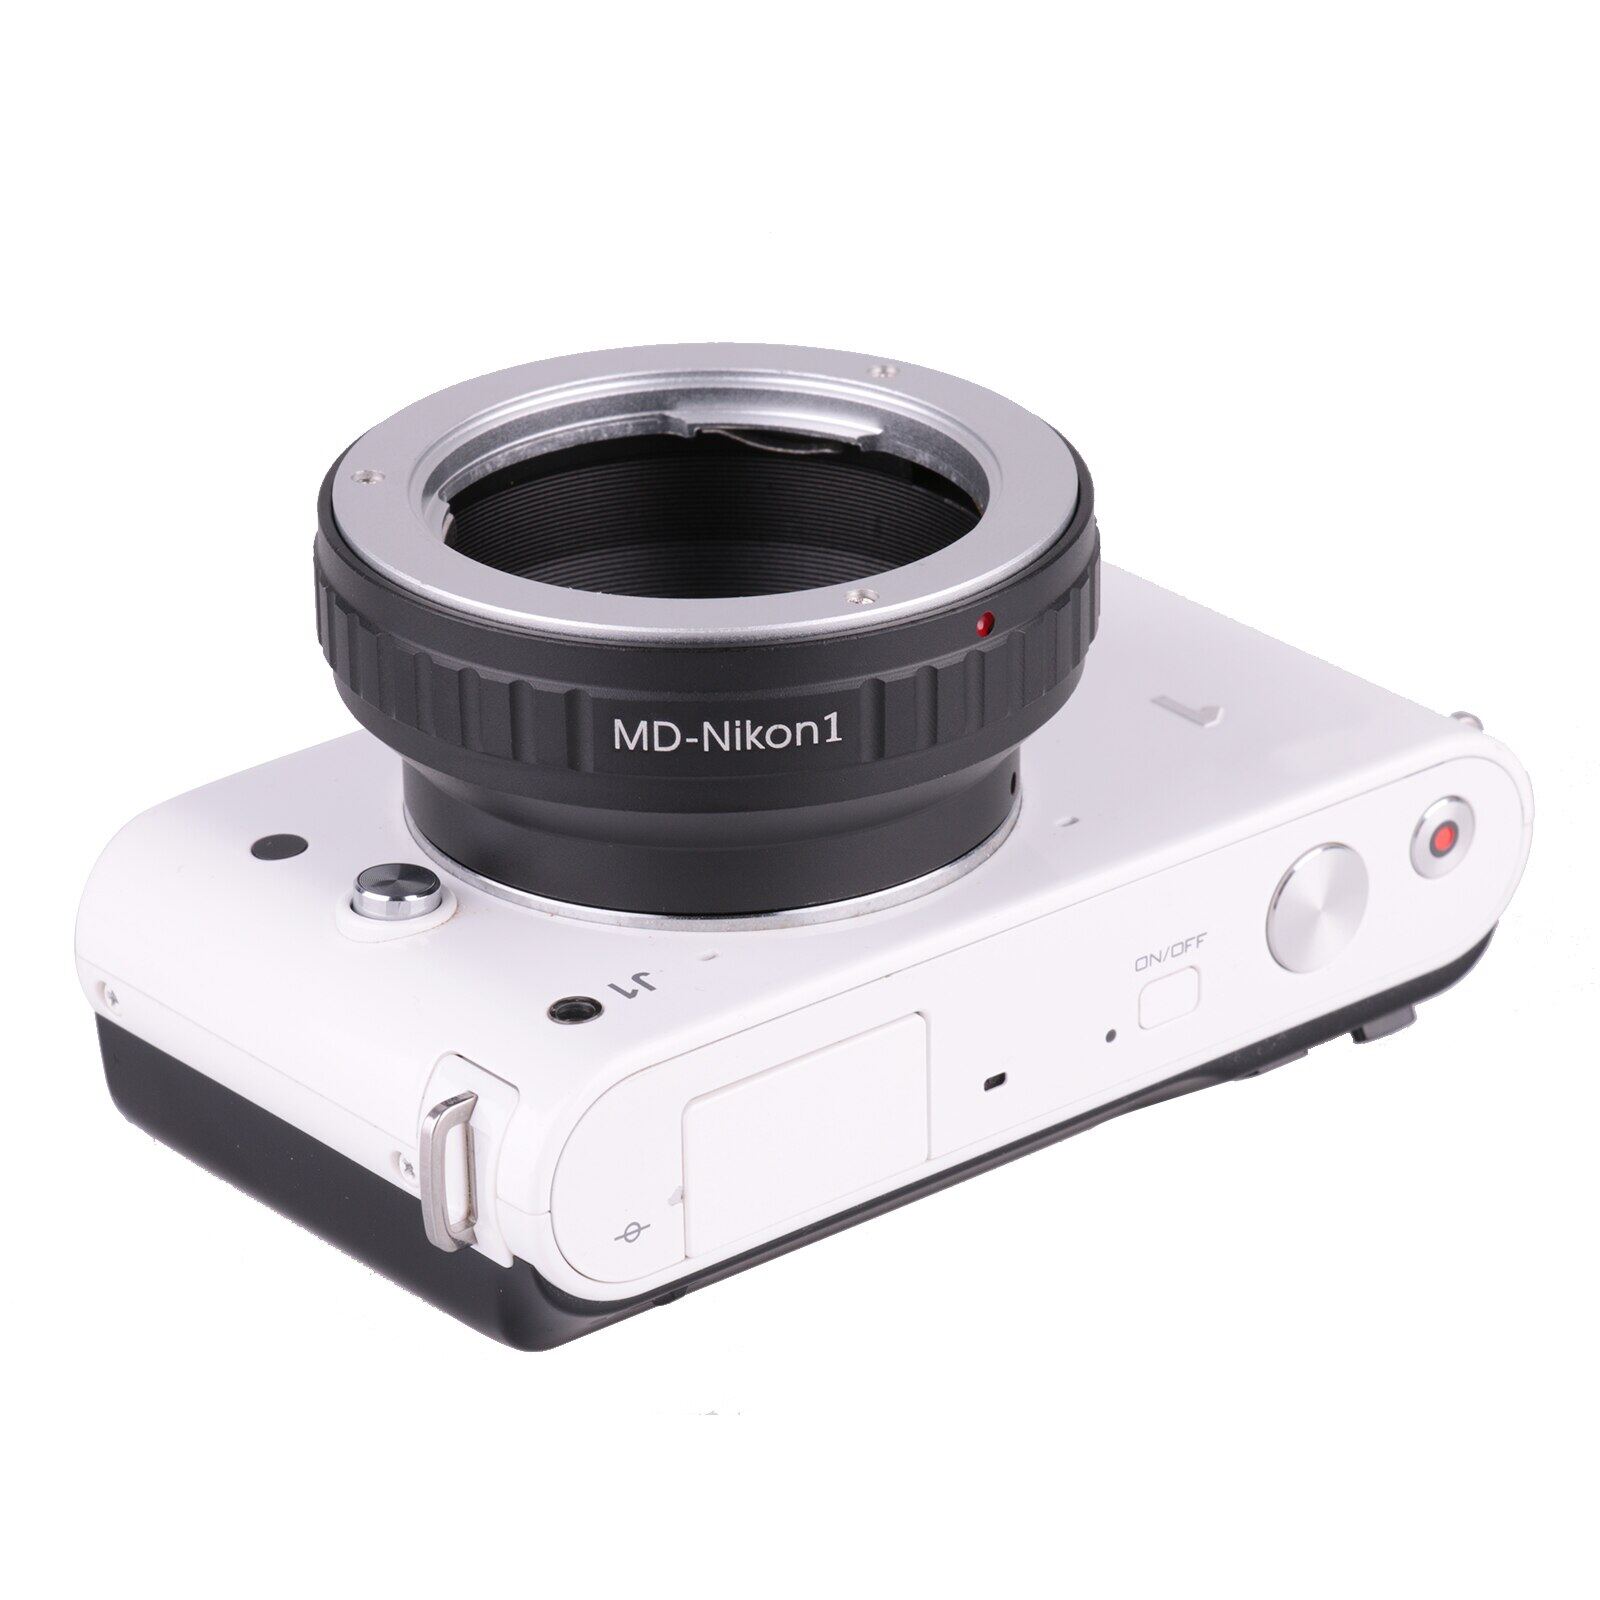 HoTsales MD-N1 For Minolta MD Mount Lens Convert For Nikon 1 S1 S2 AW1 V1